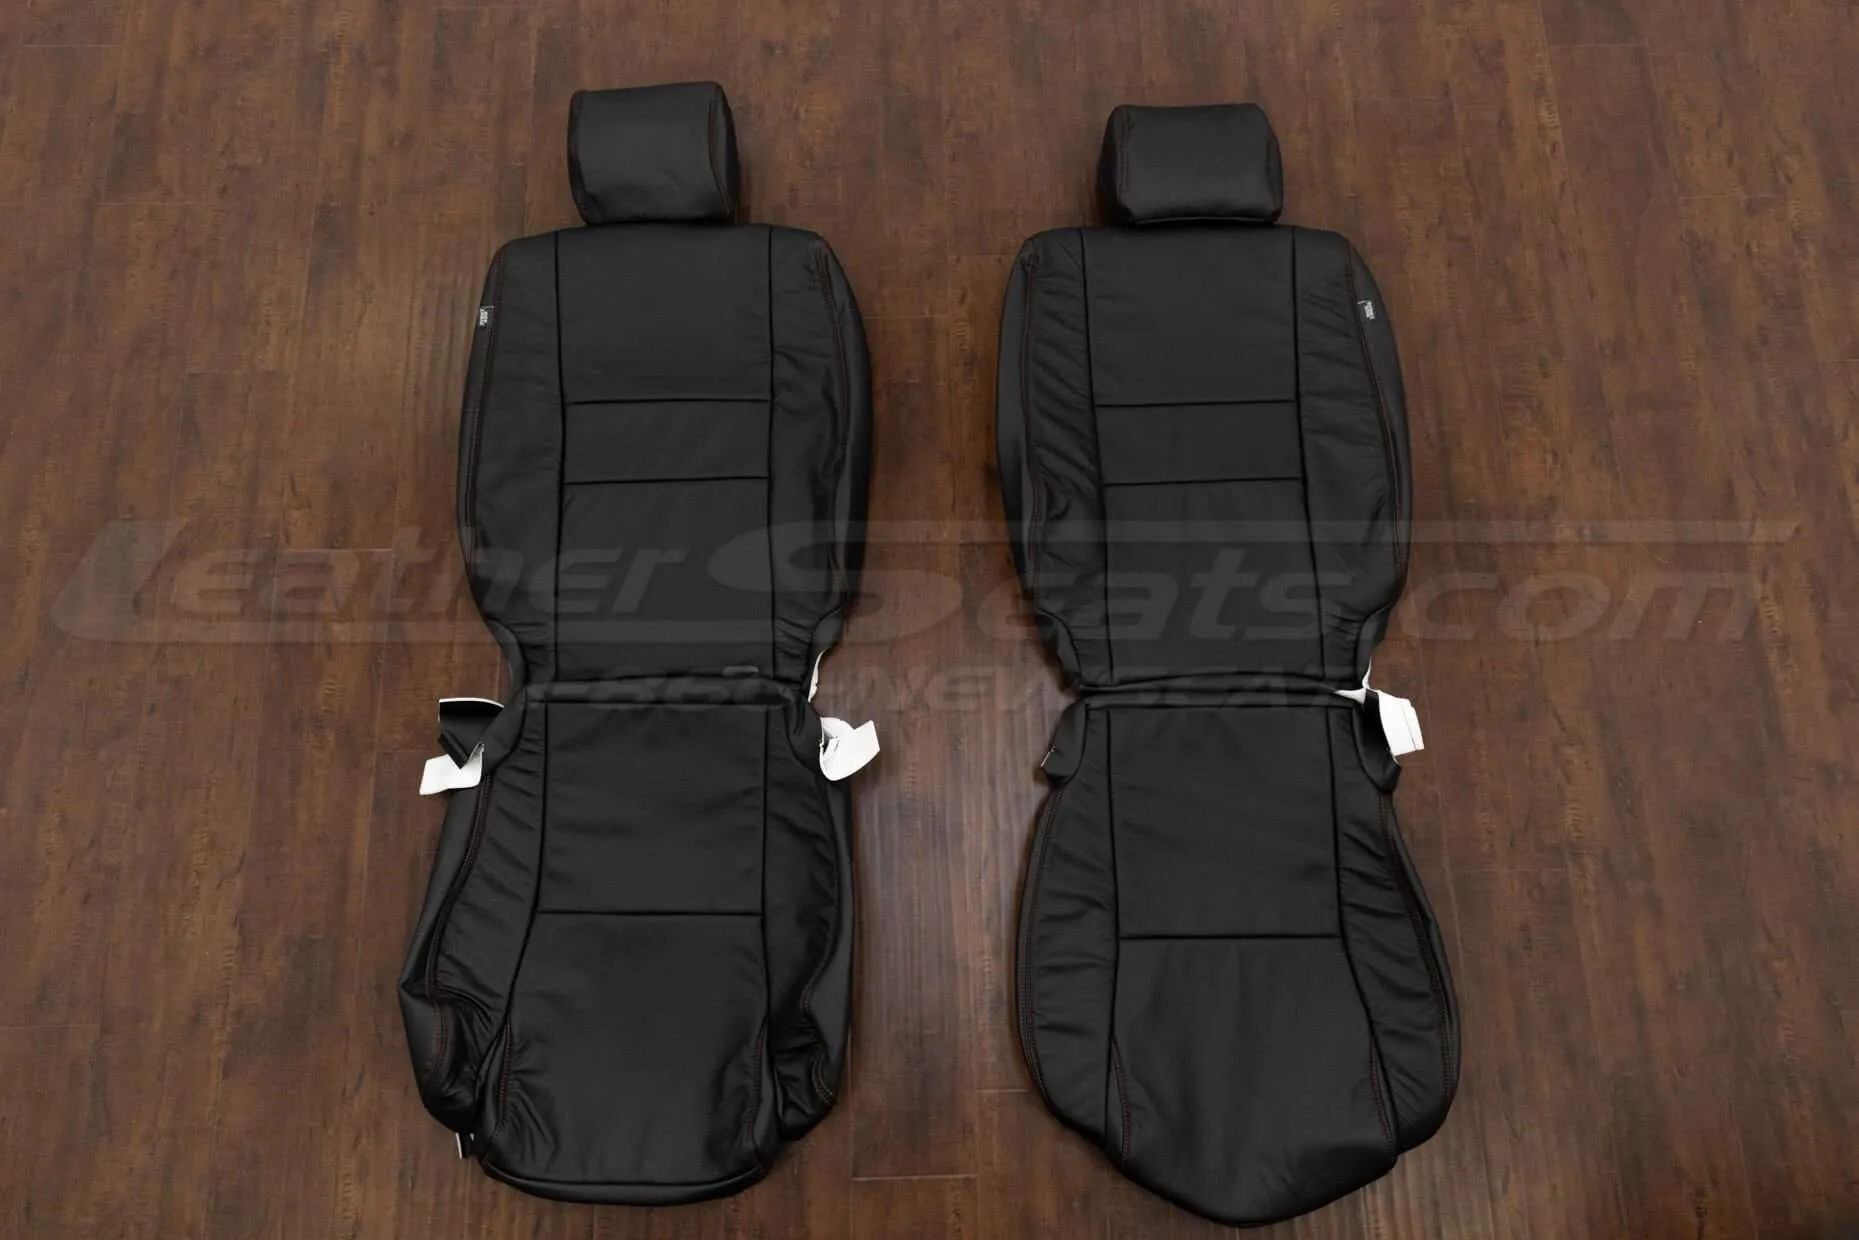 Toyota Sequoia Leather Seat Kit- Black - Front seat upholstery